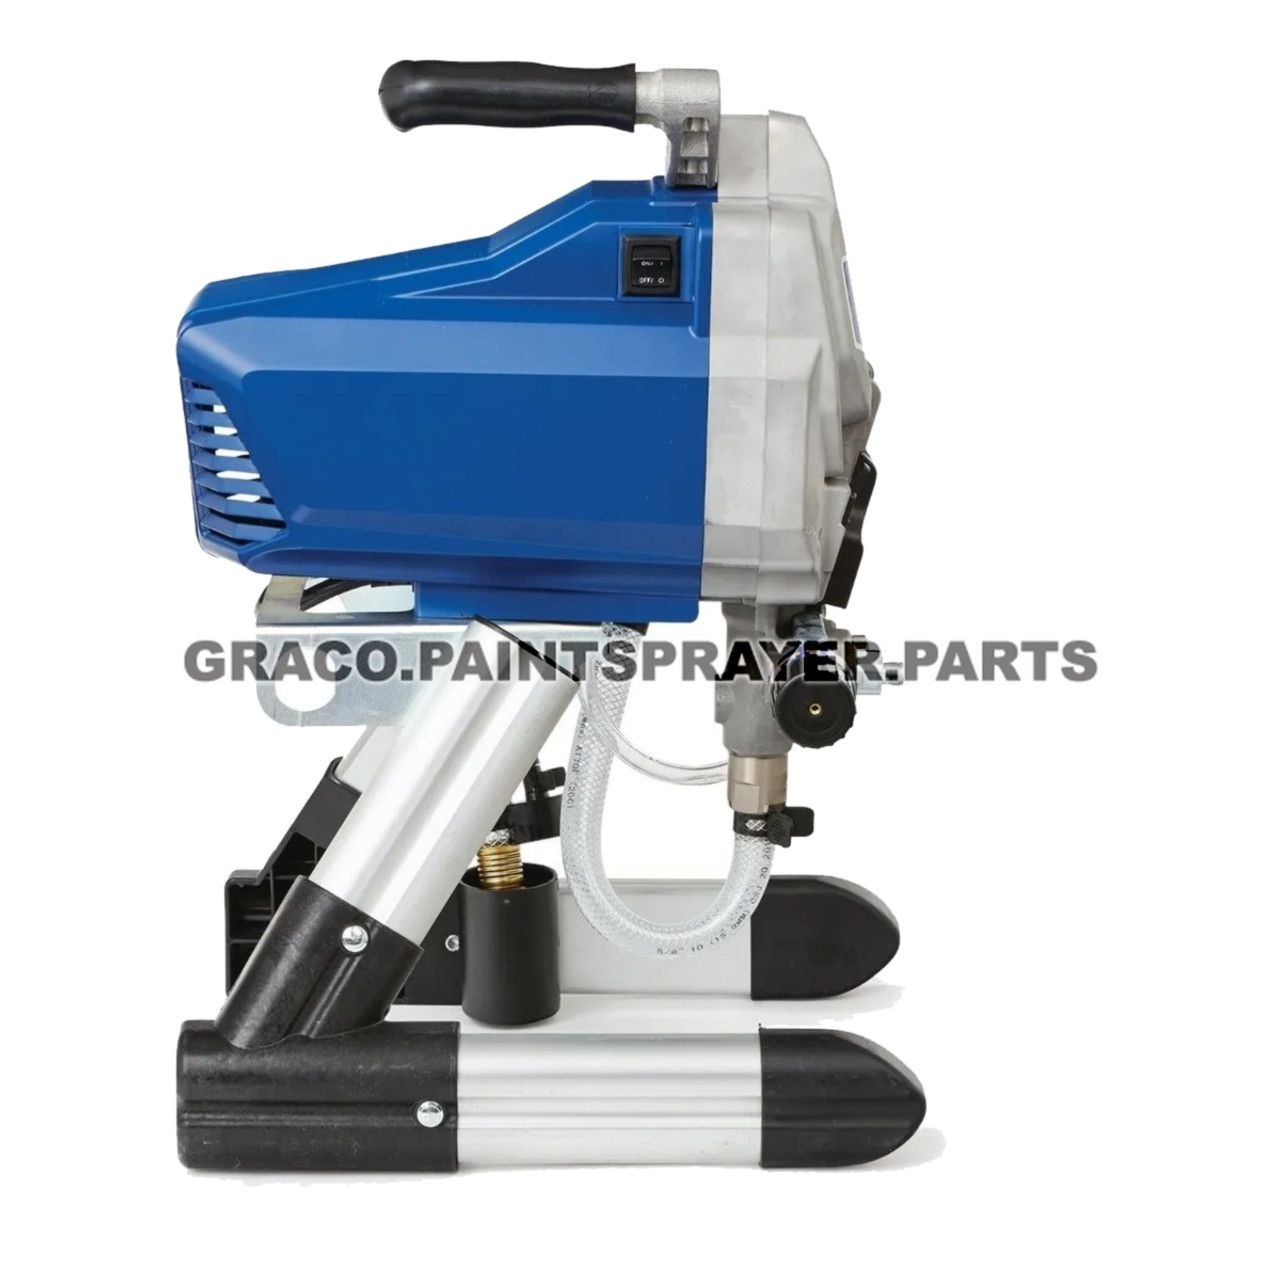 Graco Magnum ProX19 Stand Airless Paint Sprayer - 17G179